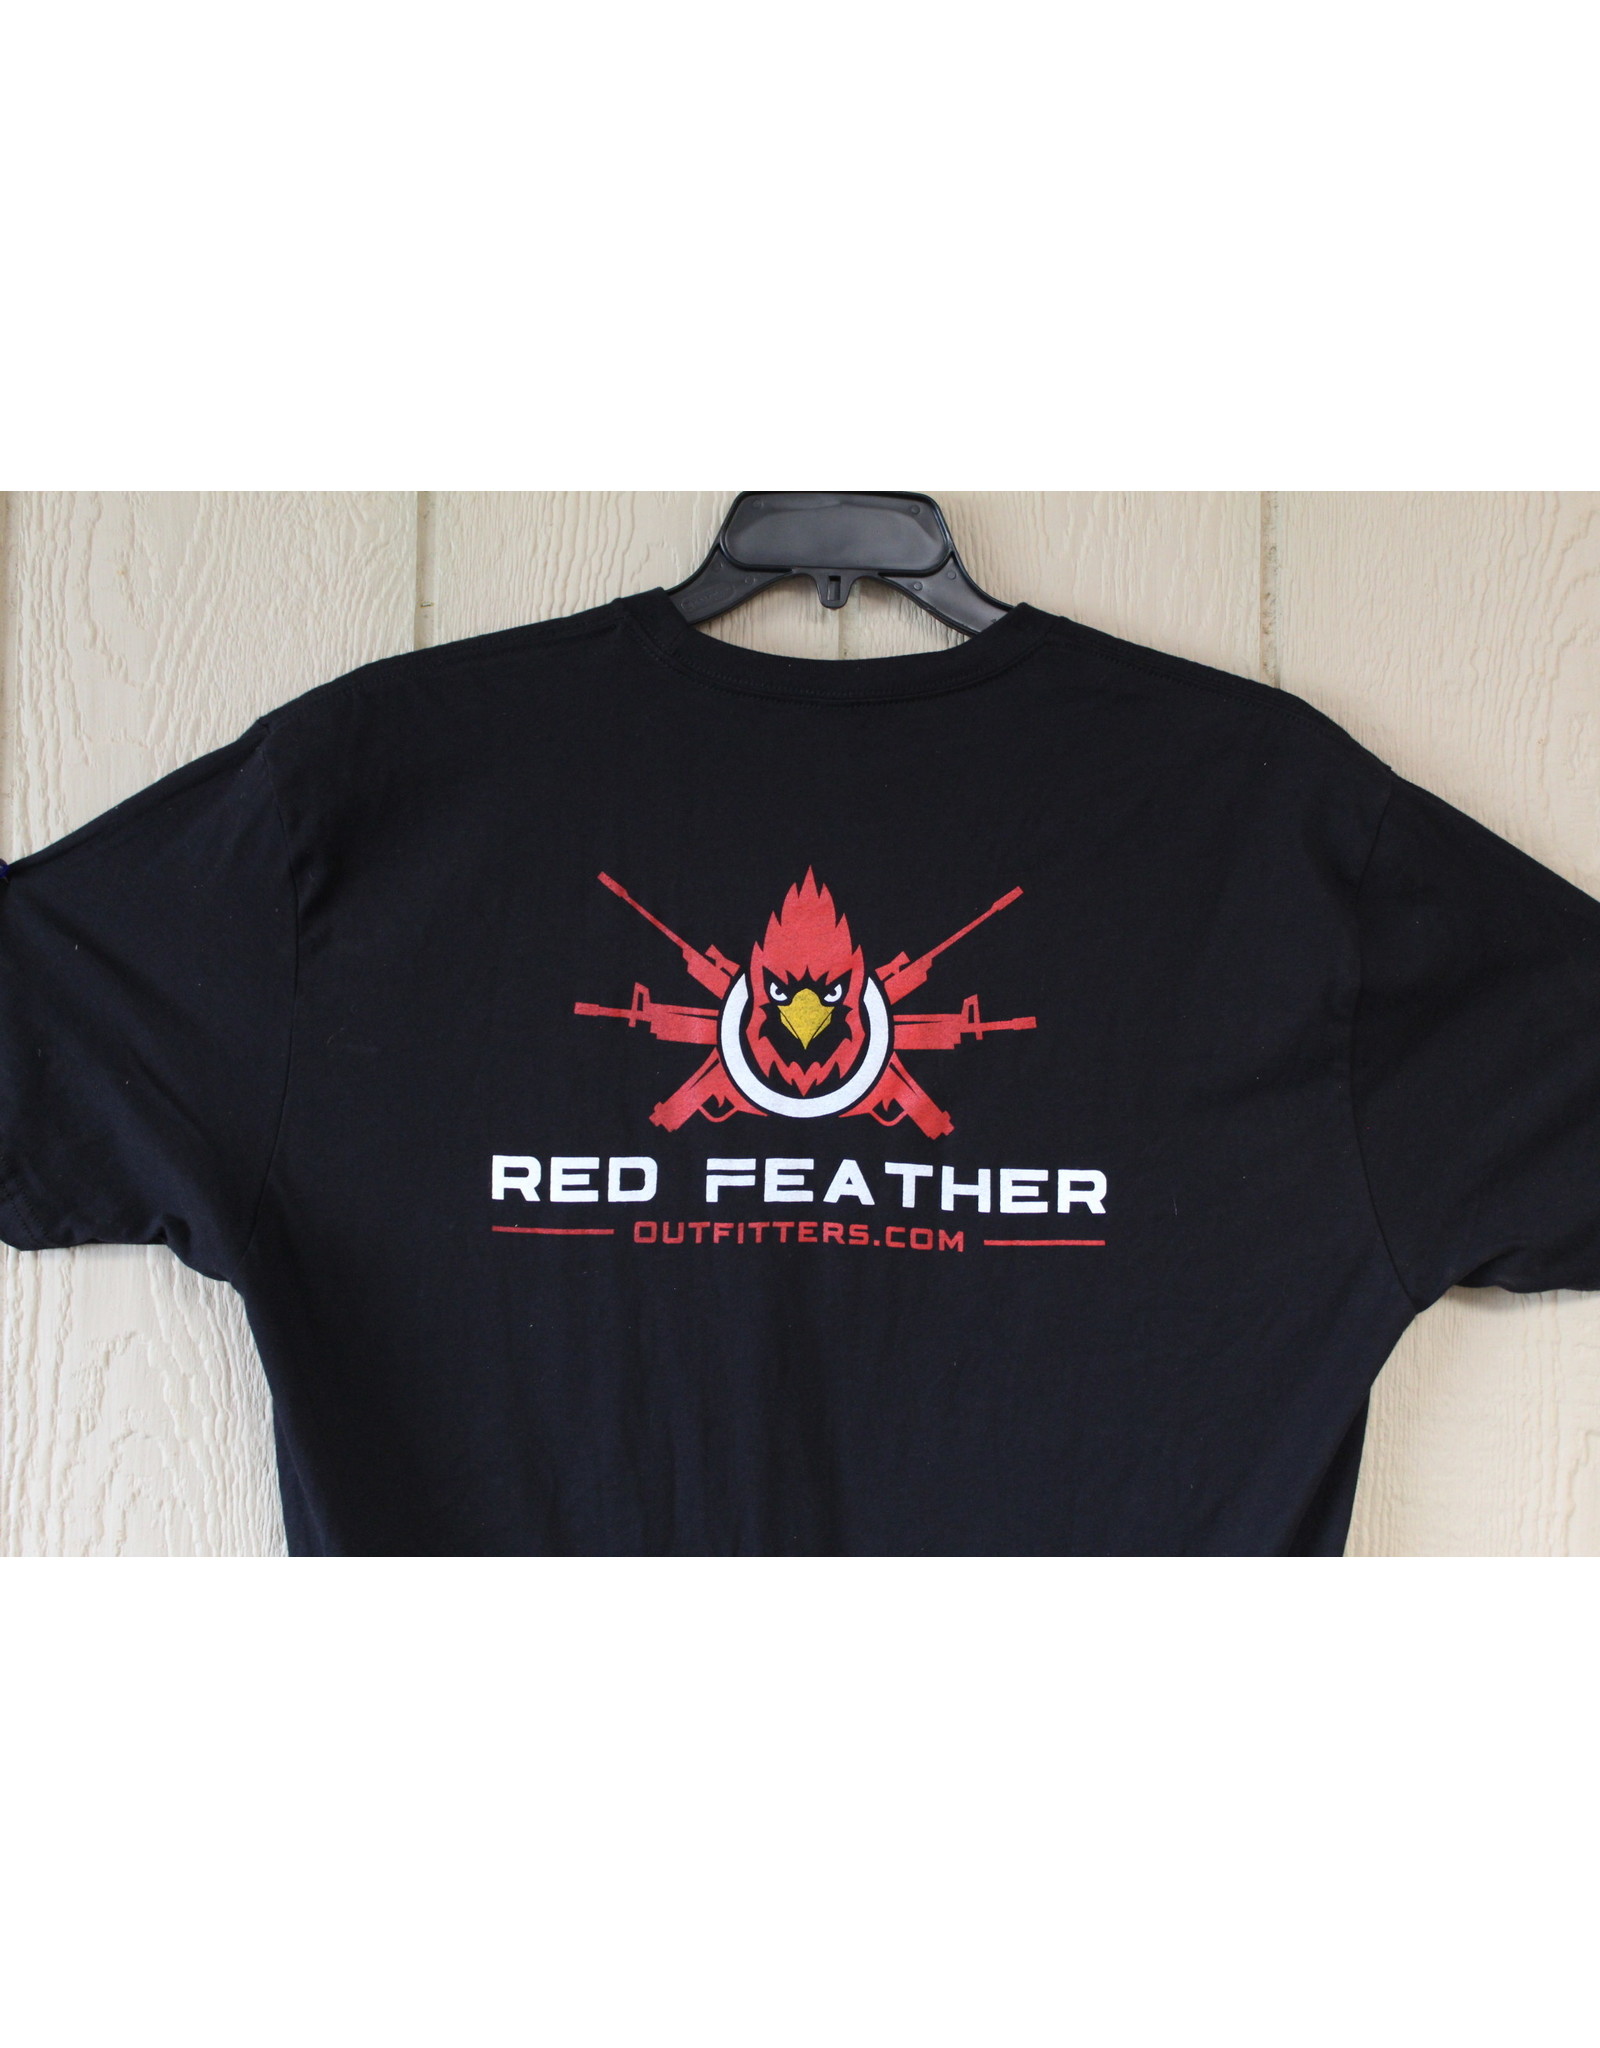 Red Feather Outfitters - Black Cotton Shirts